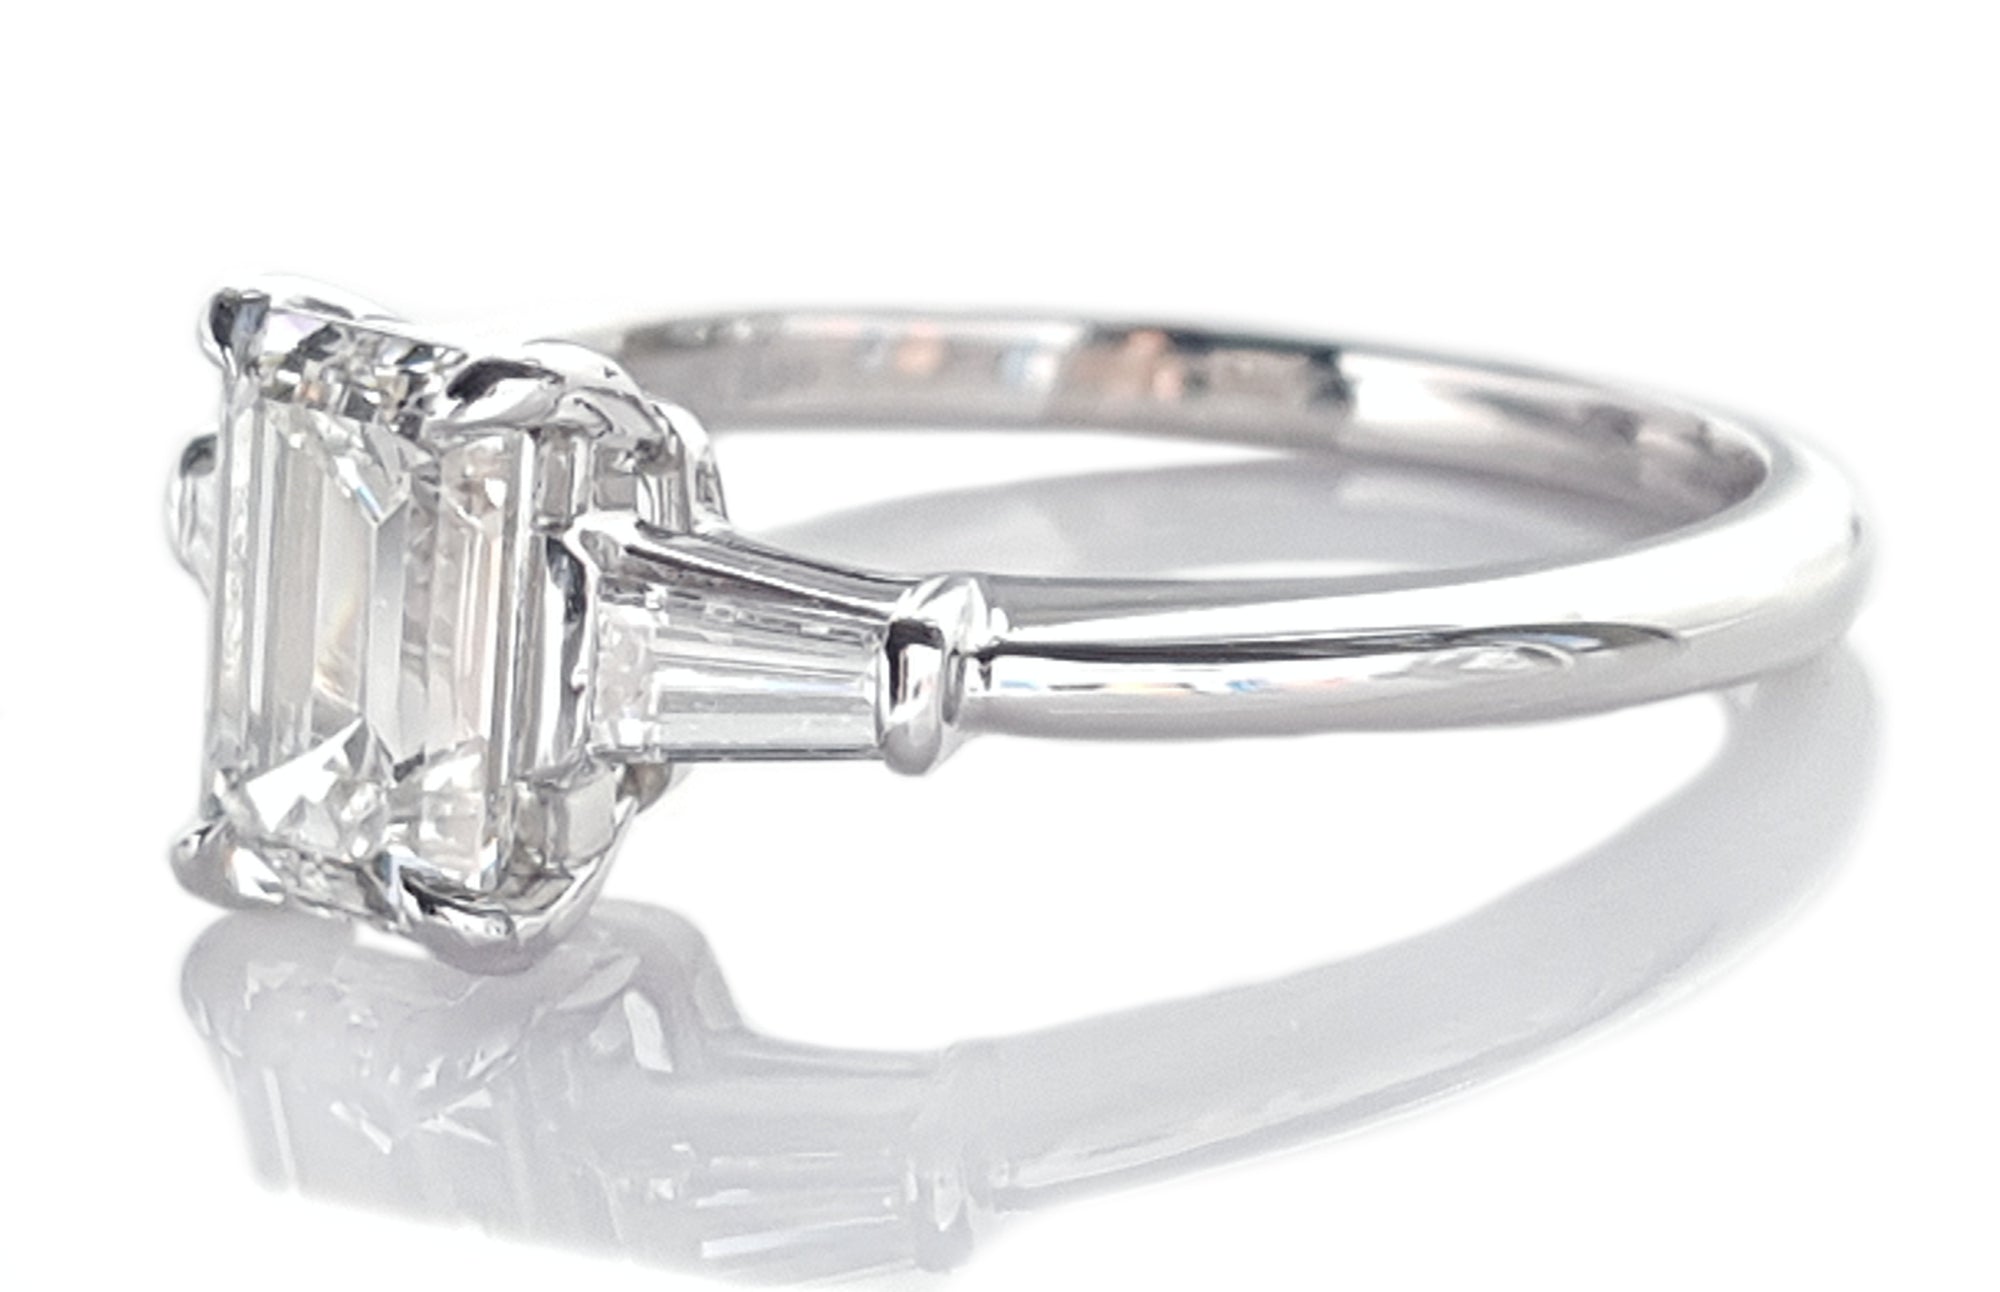 Tiffany & Co H/VS1 1.26tcw 3 Stone Emerald Cut & Tapered Baguette Diamond Engagement Ring